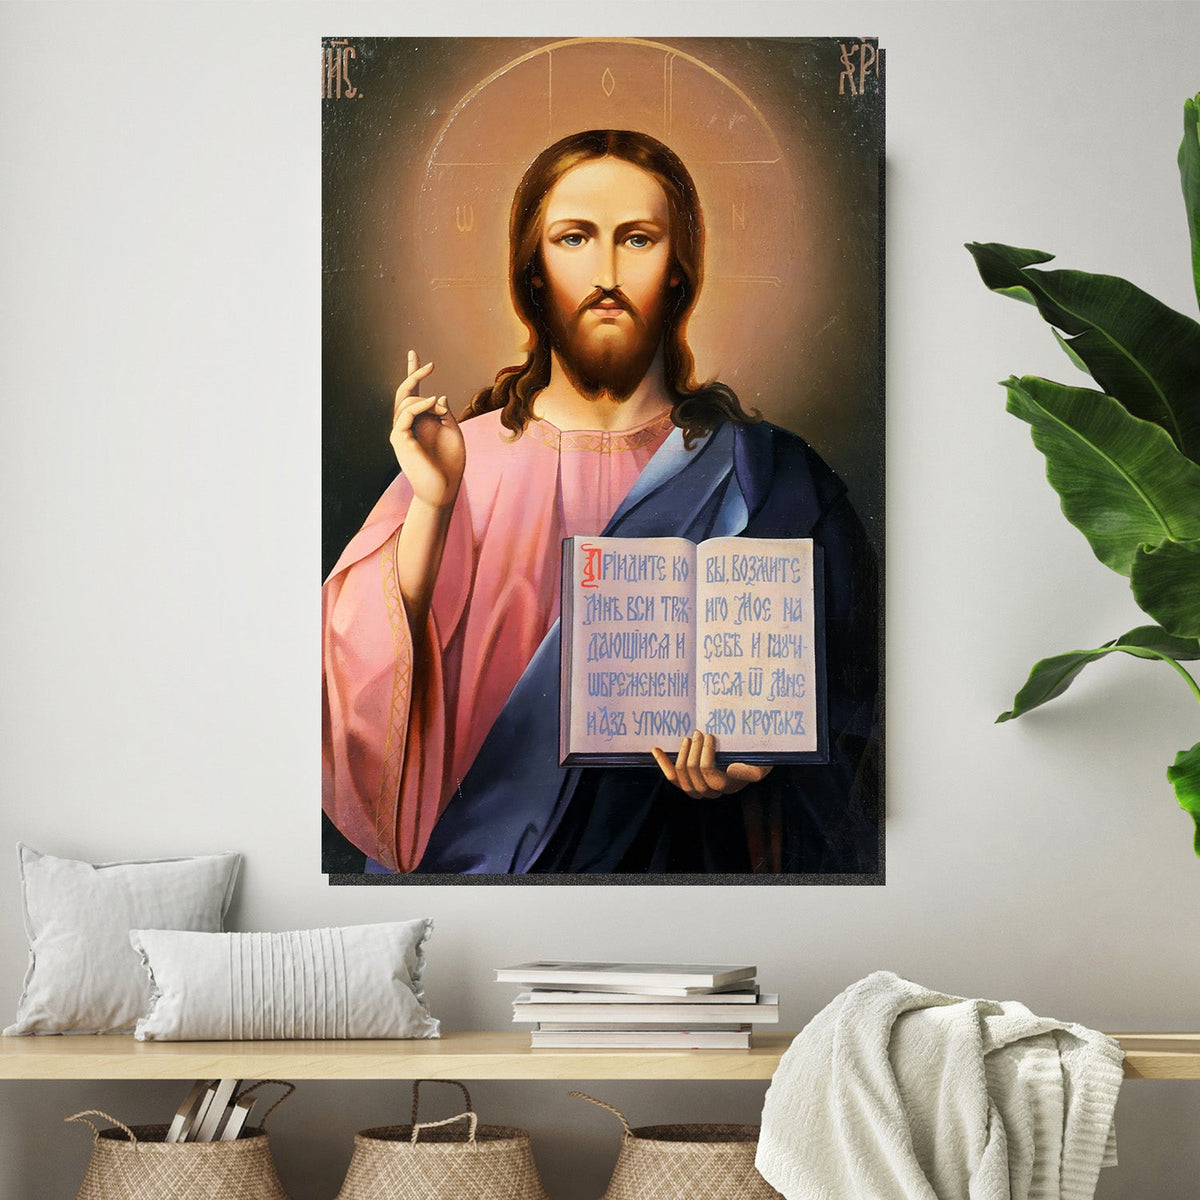 https://cdn.shopify.com/s/files/1/0387/9986/8044/products/ChristTheMessiahCanvasArtprintStretched-4.jpg